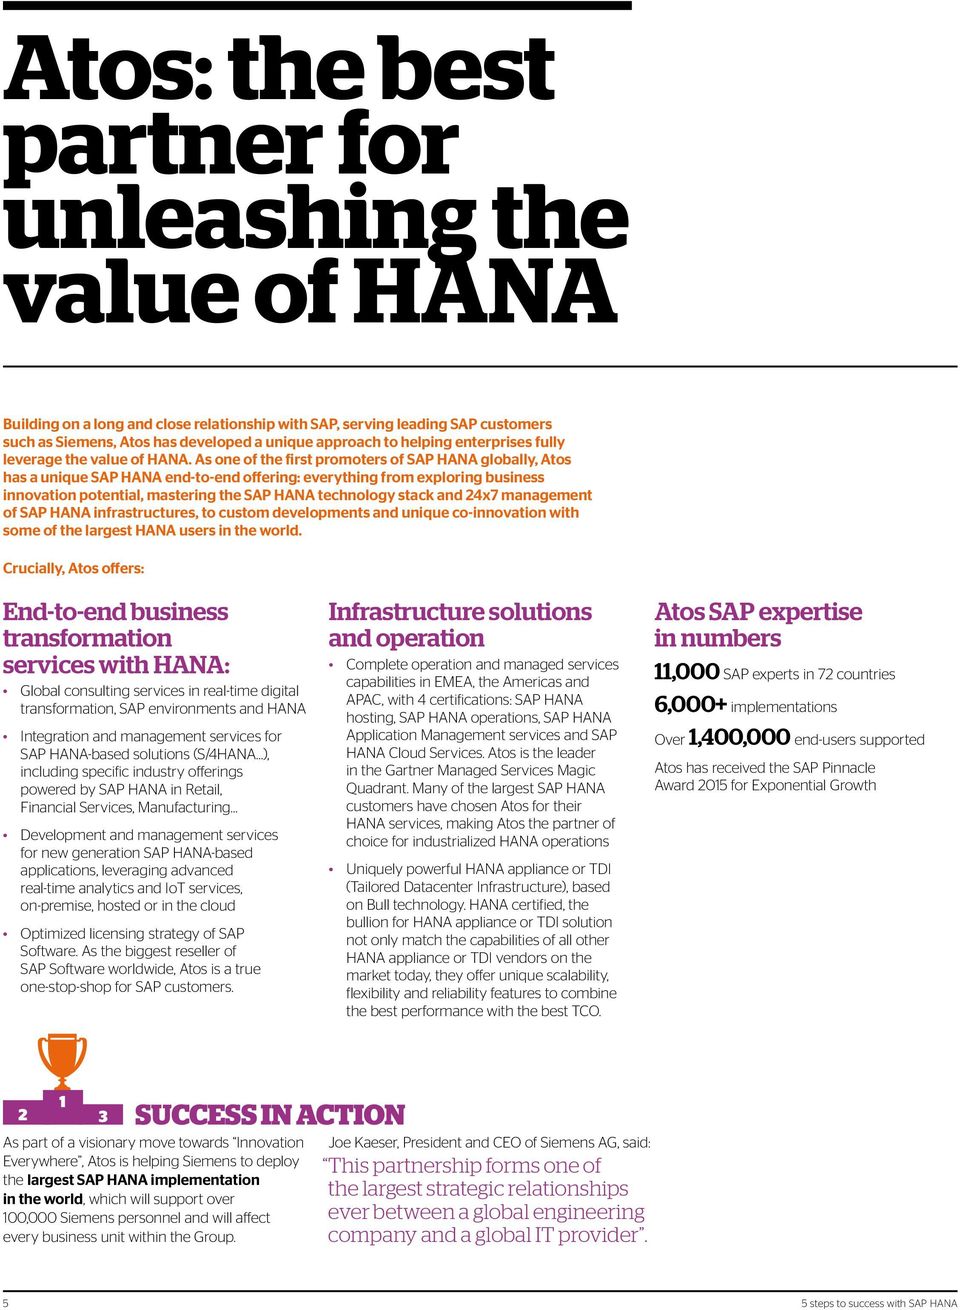 As one of the first promoters of SAP HANA globally, Atos has a unique SAP HANA end-to-end offering: everything from exploring business innovation potential, mastering the SAP HANA technology stack